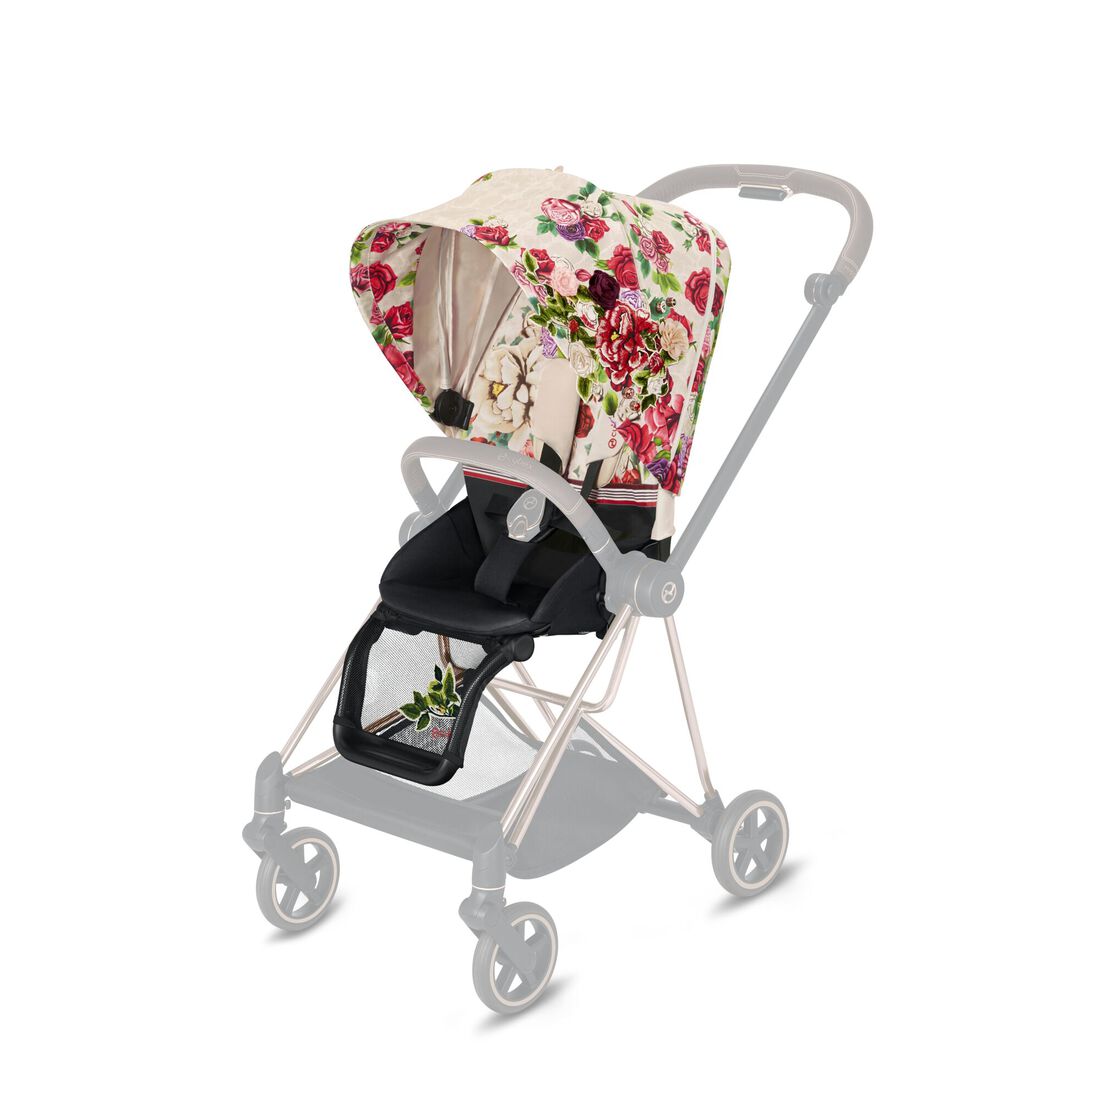 CYBEX Seat Pack Mios 2 - Spring Blossom Light in Spring Blossom Light large numéro d’image 1